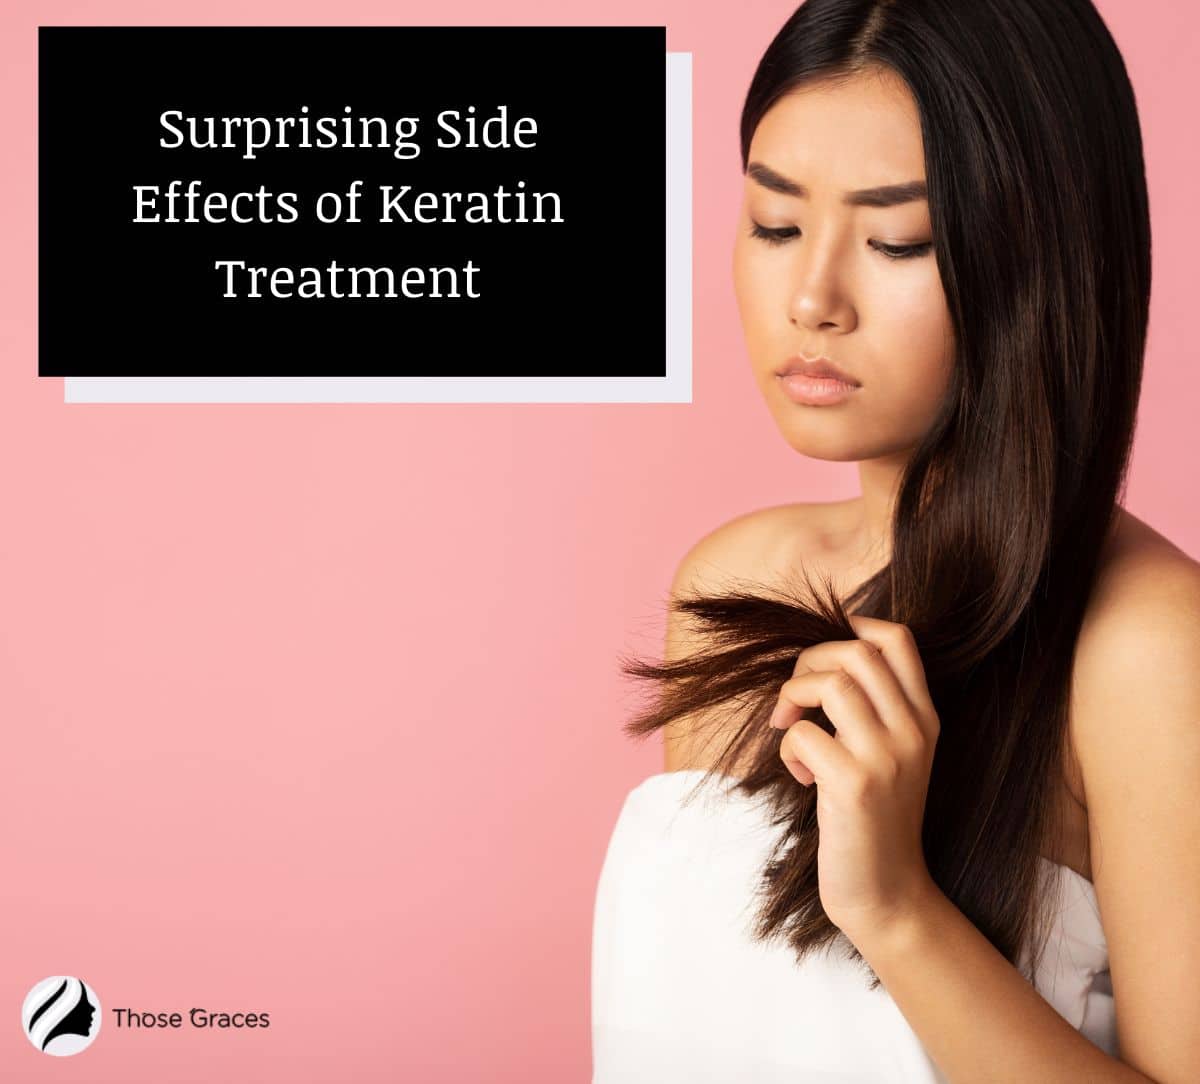 lady holding her hair and worried about the side effects of keratin treatment